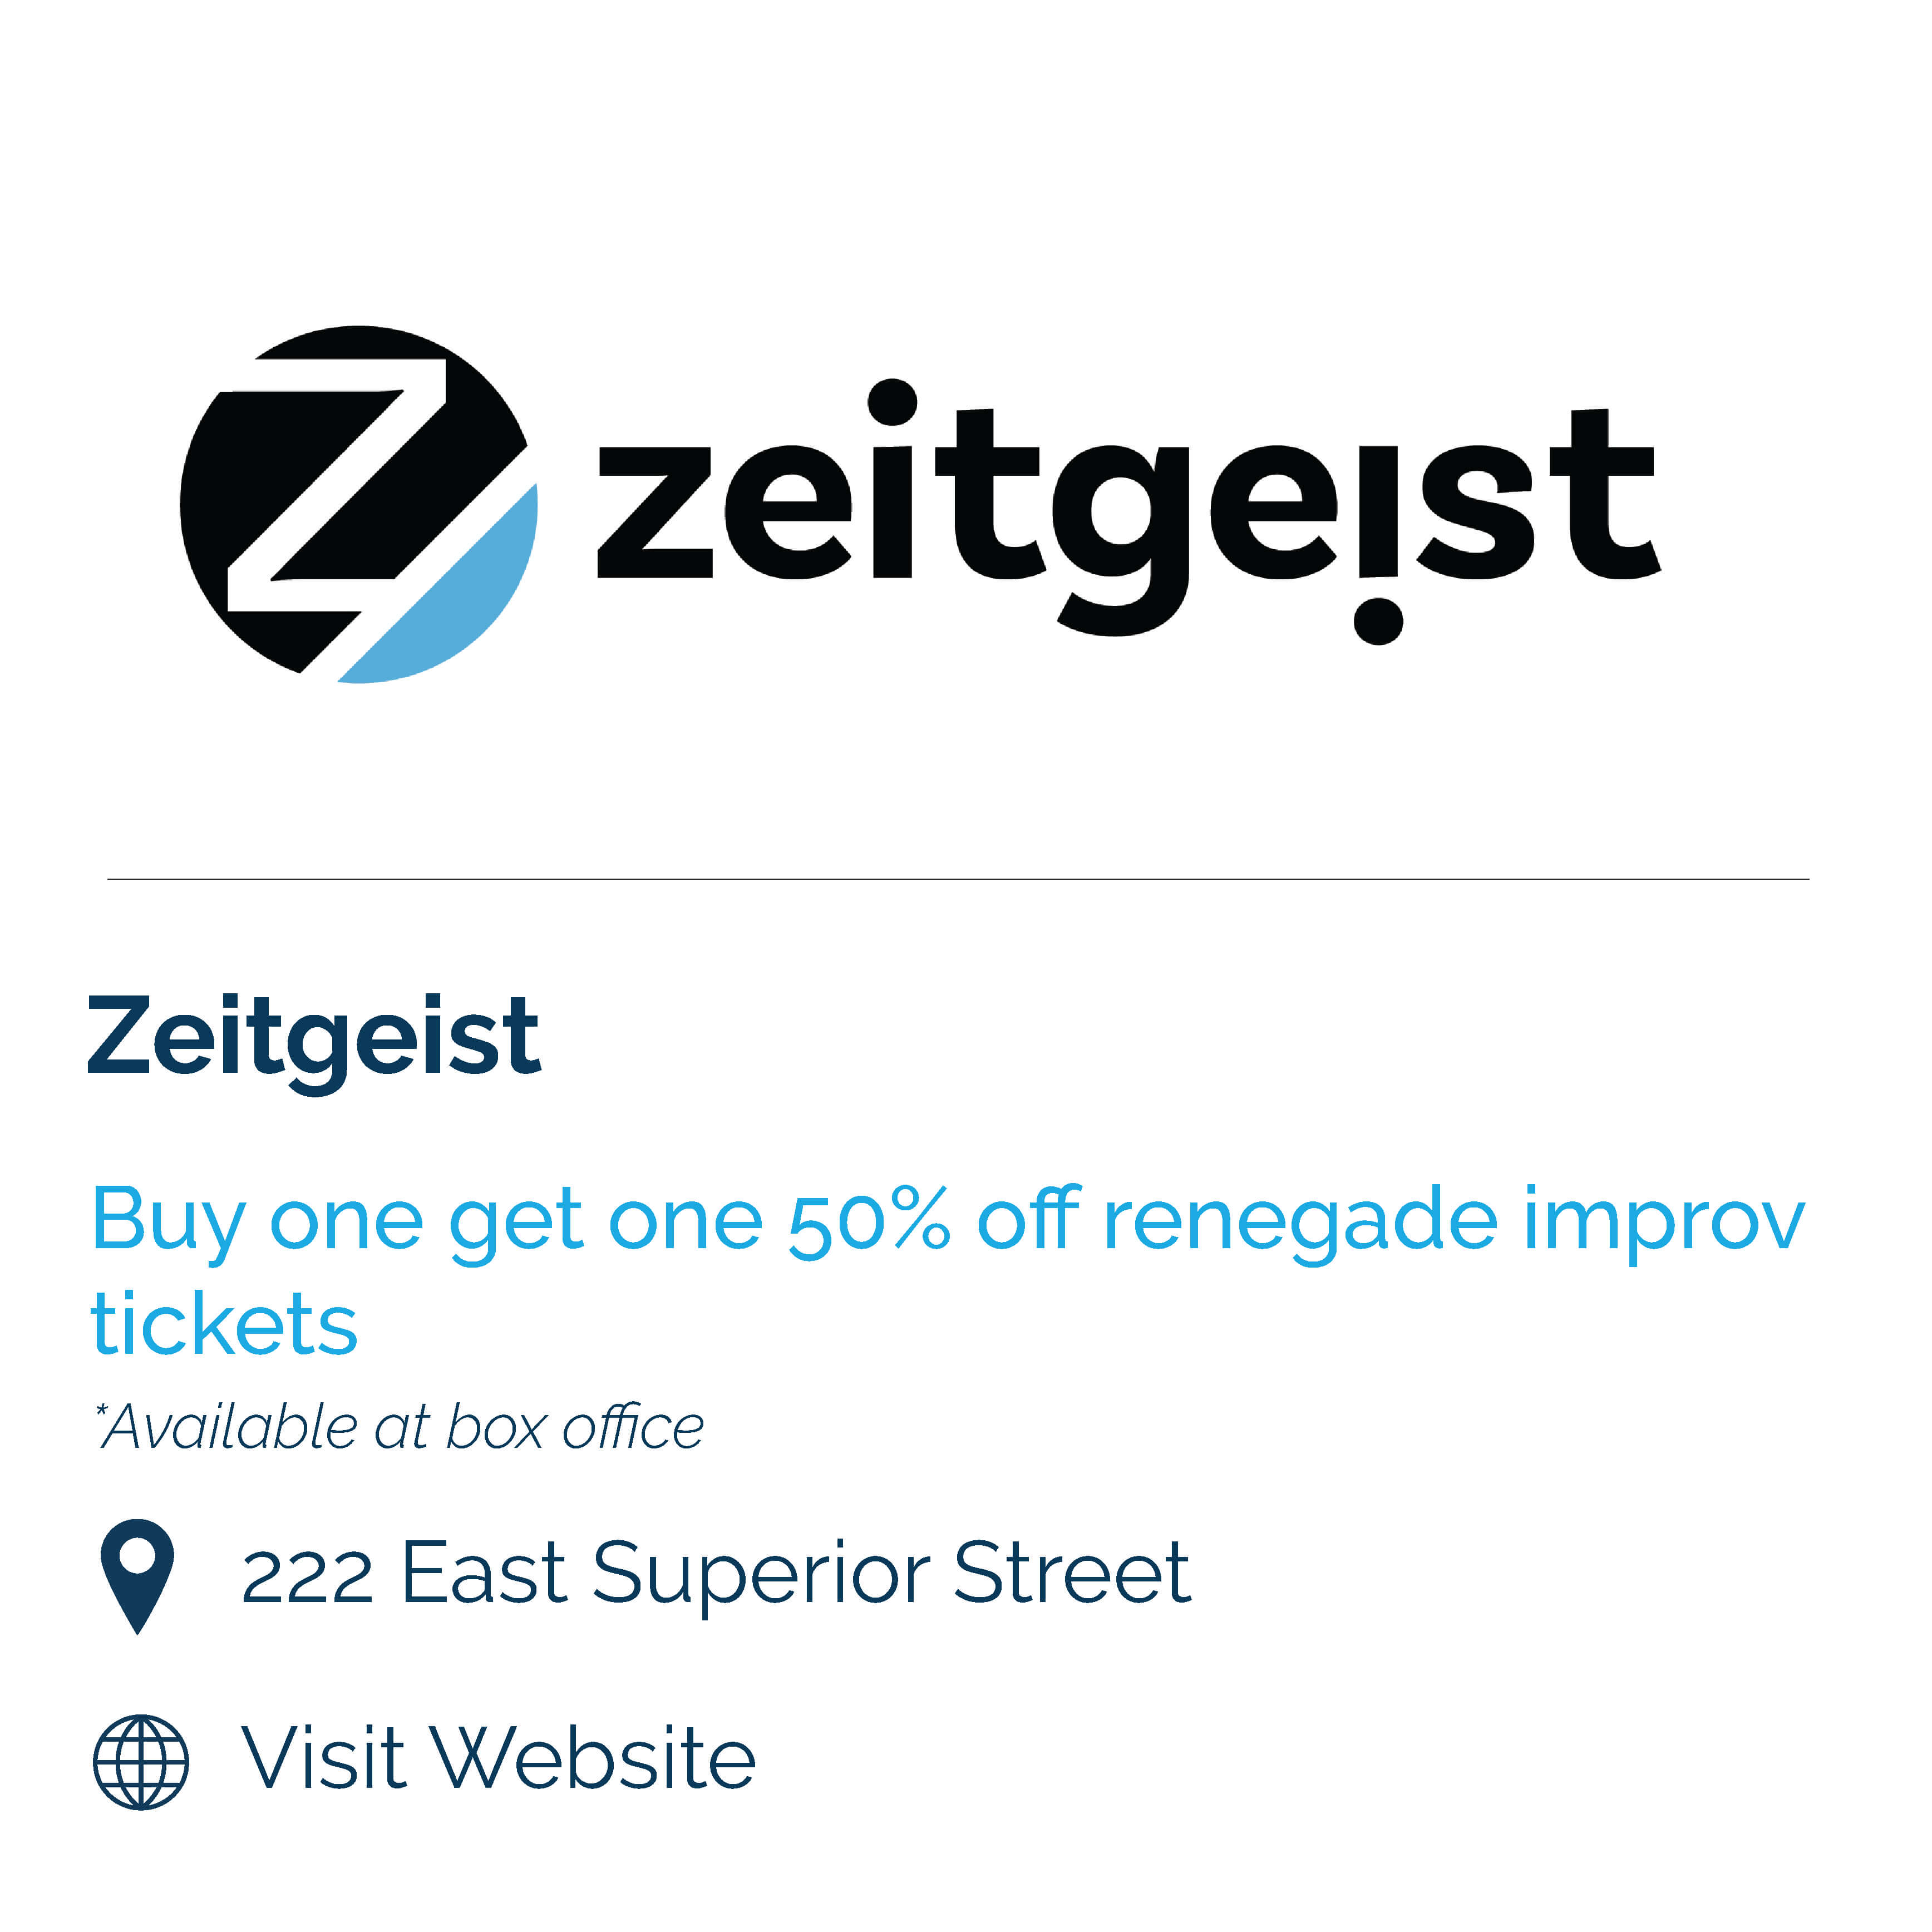 zeitgeist. buy one get one 50% off renegade improv tickets. available at box office. 222 east superior street